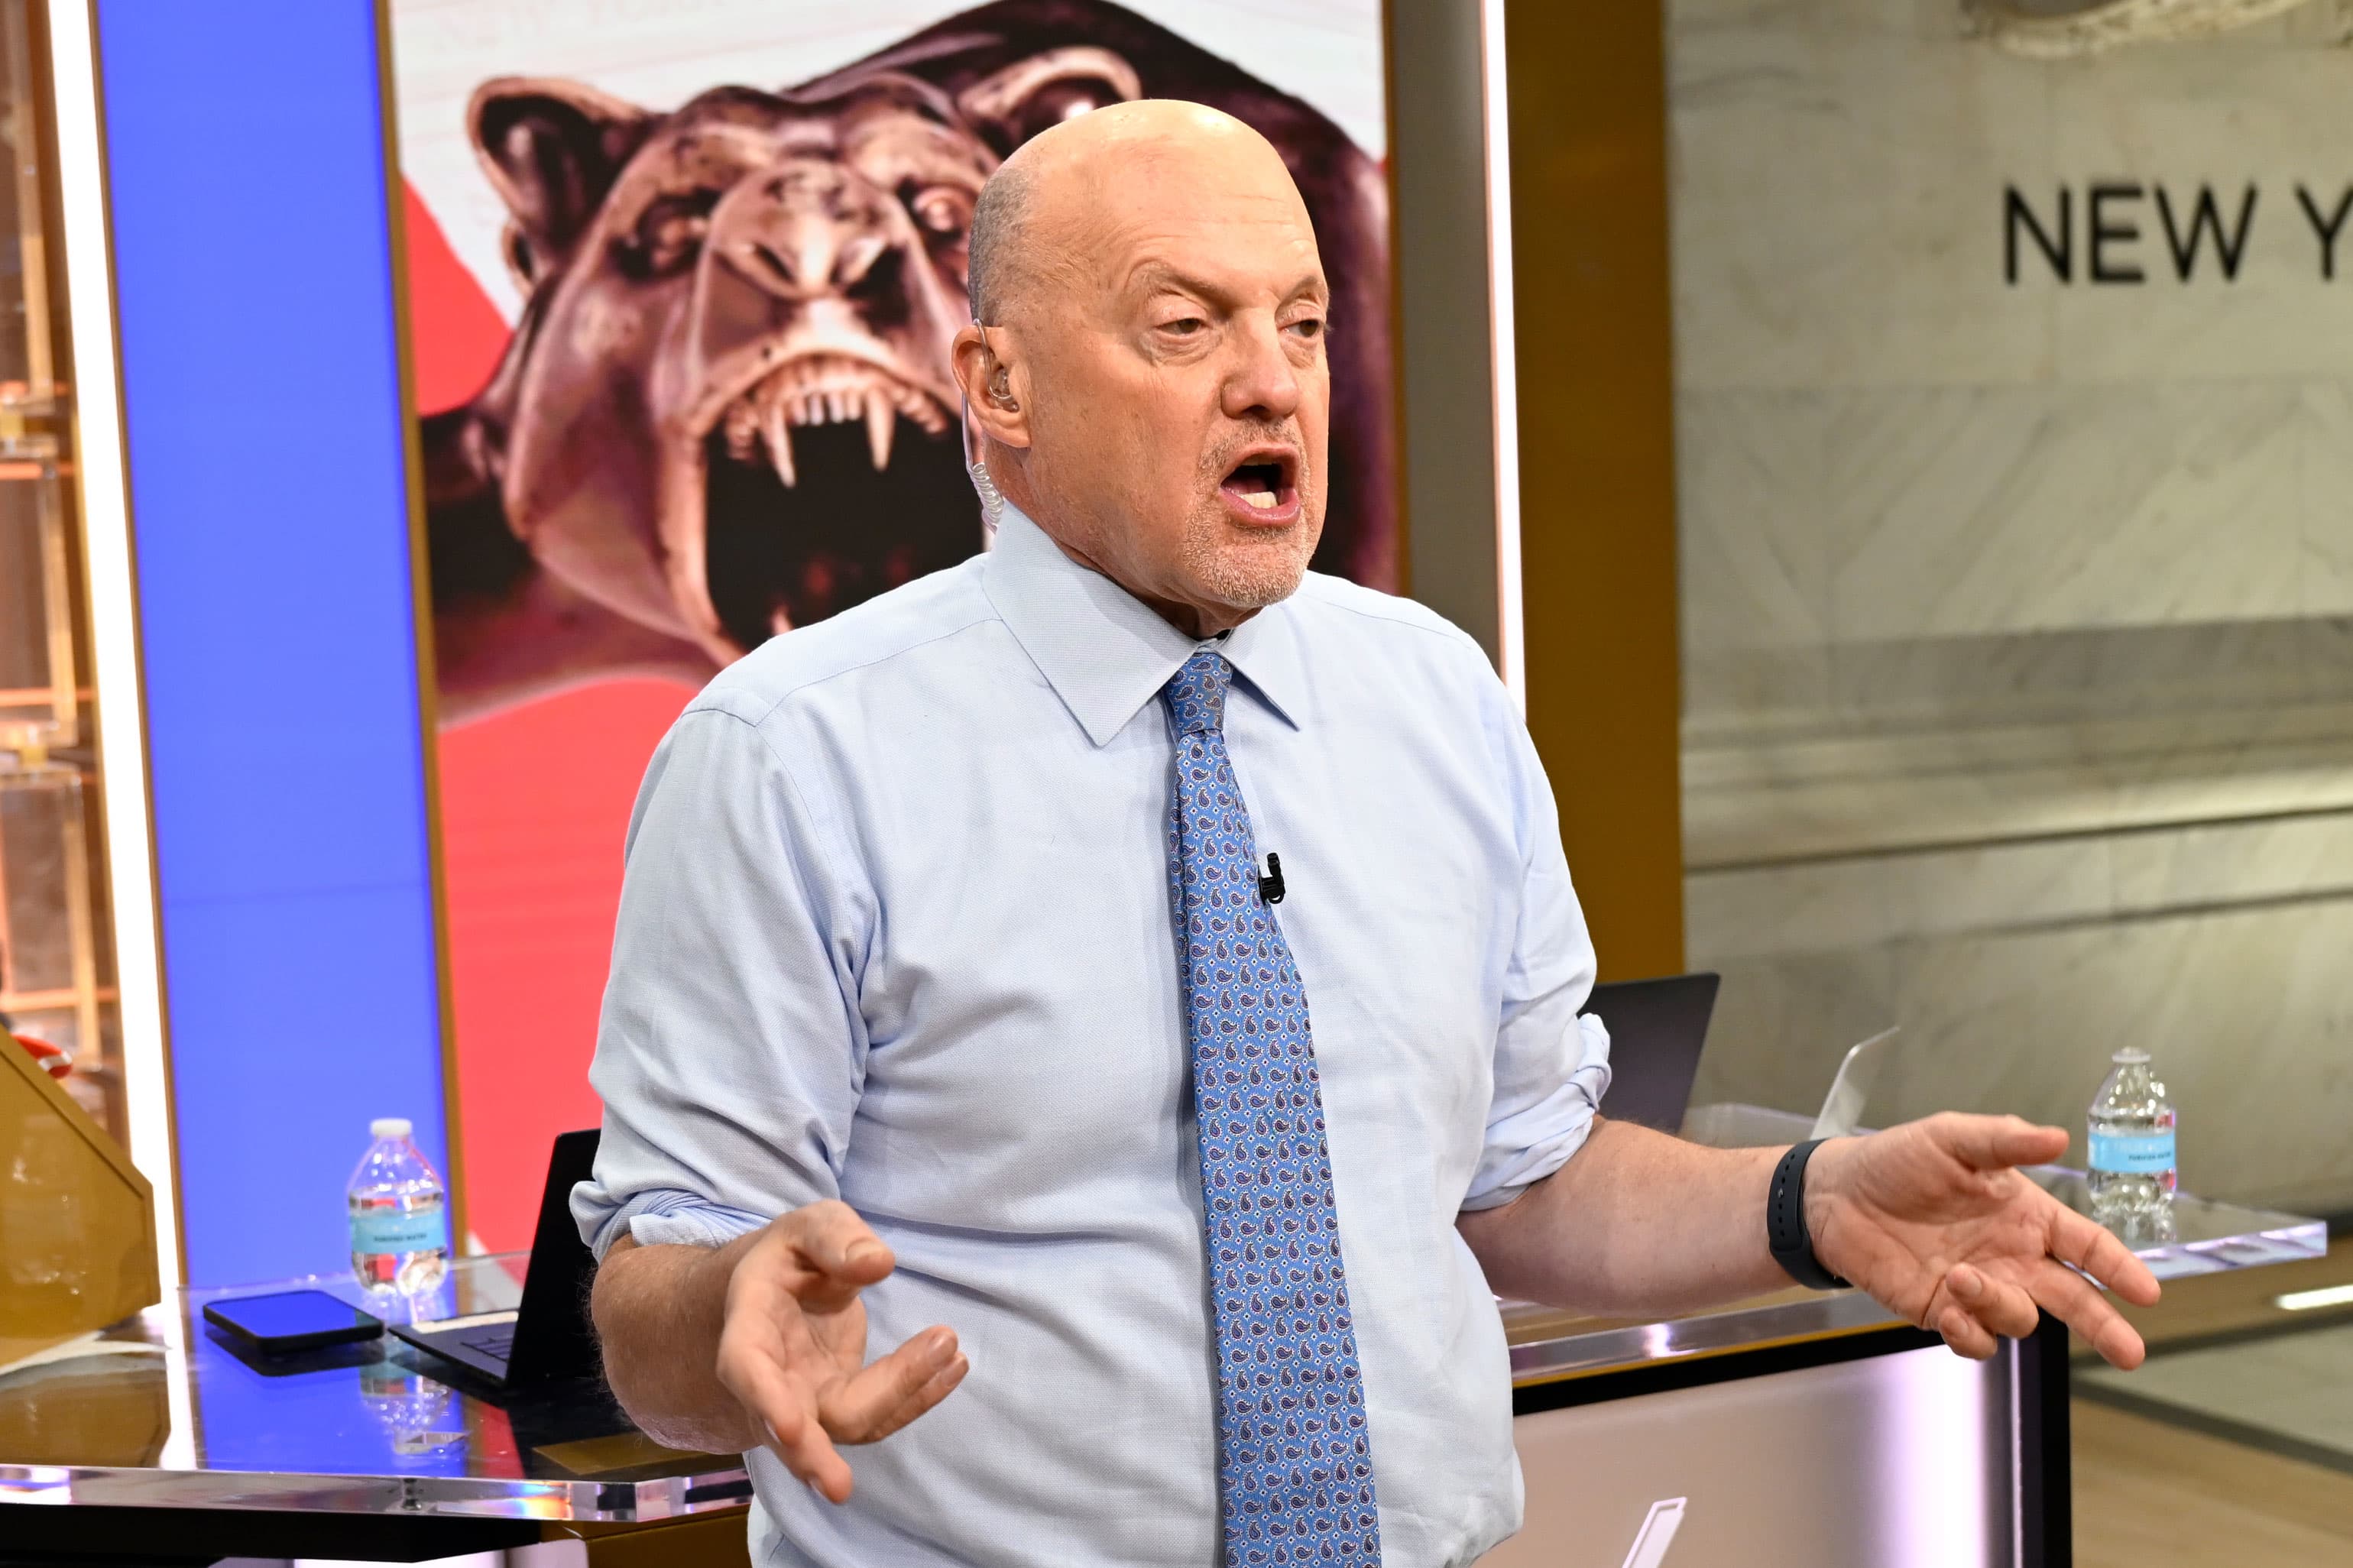 Club meeting recap: Cramer says investors should find safety in defensive stocks like Costco